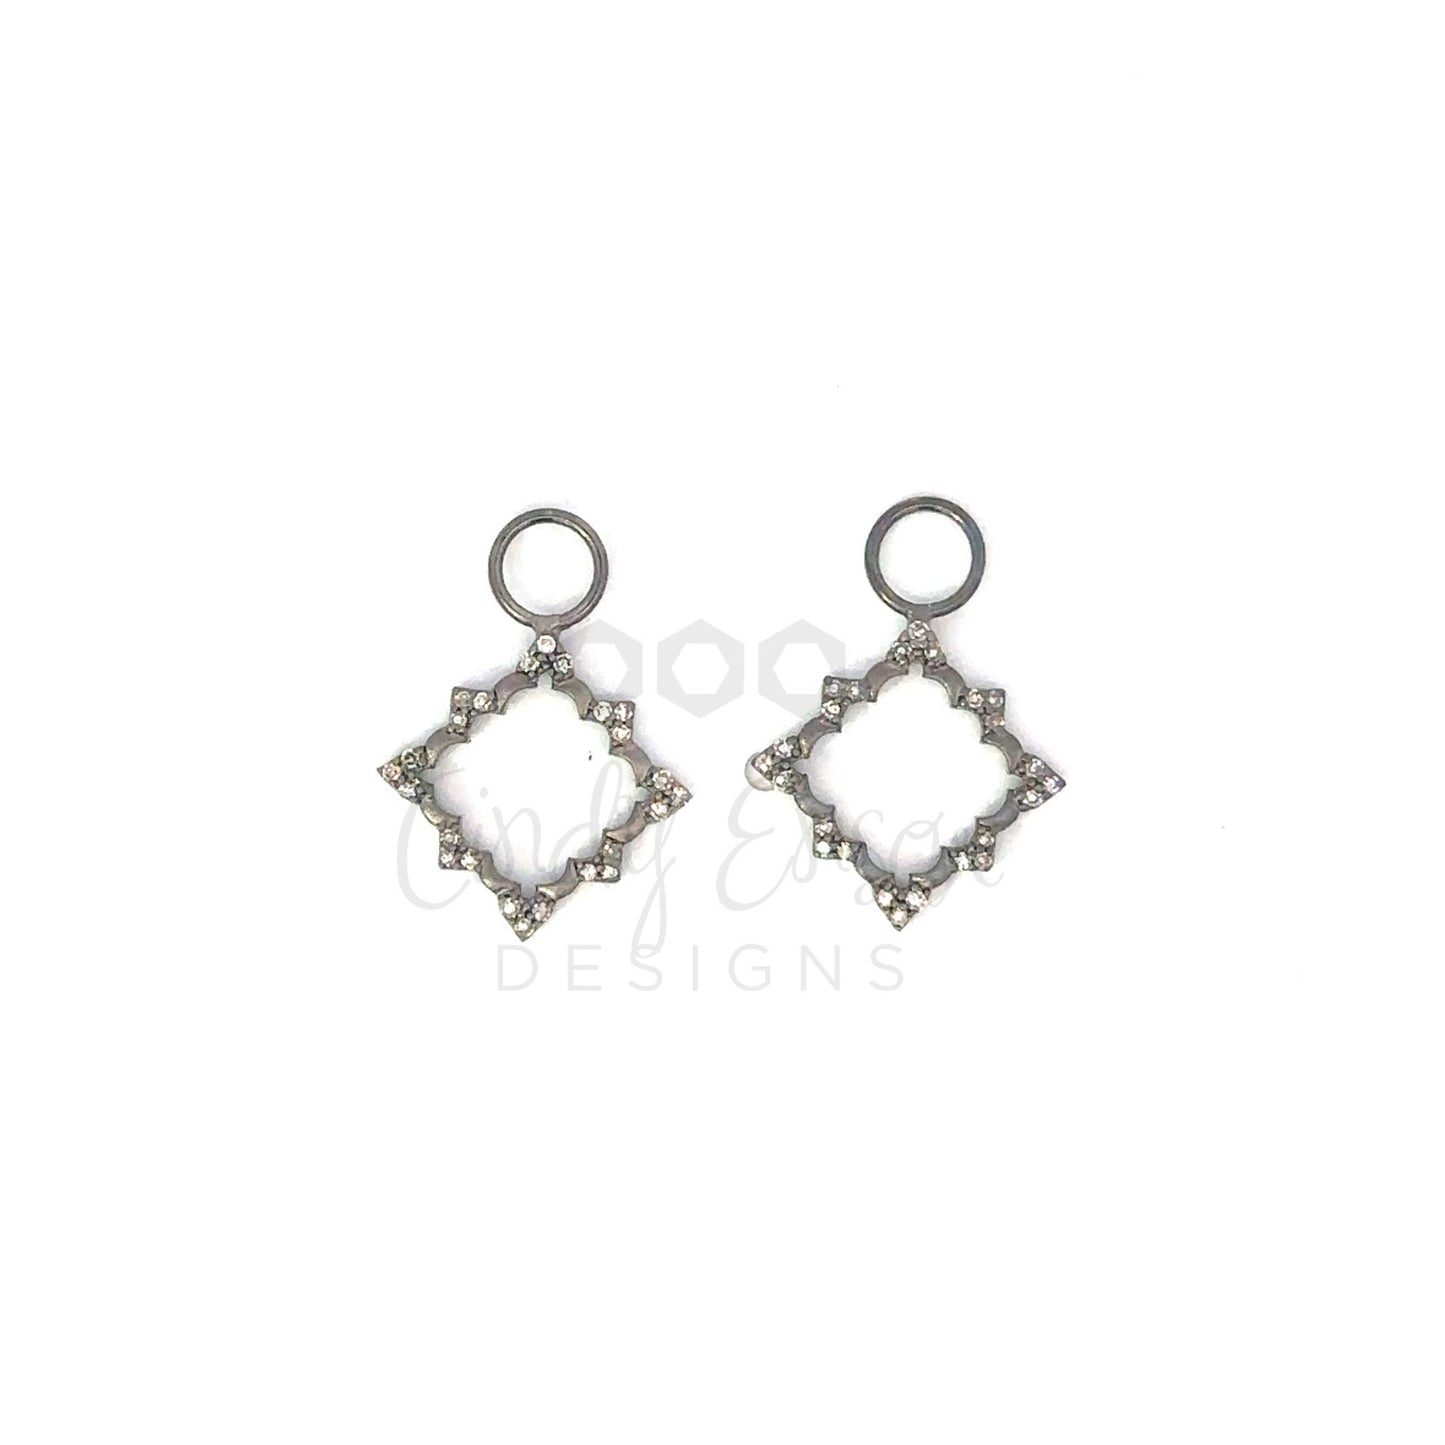 Open Diamond Shaped Earring Charm with Pave Diamond Accents